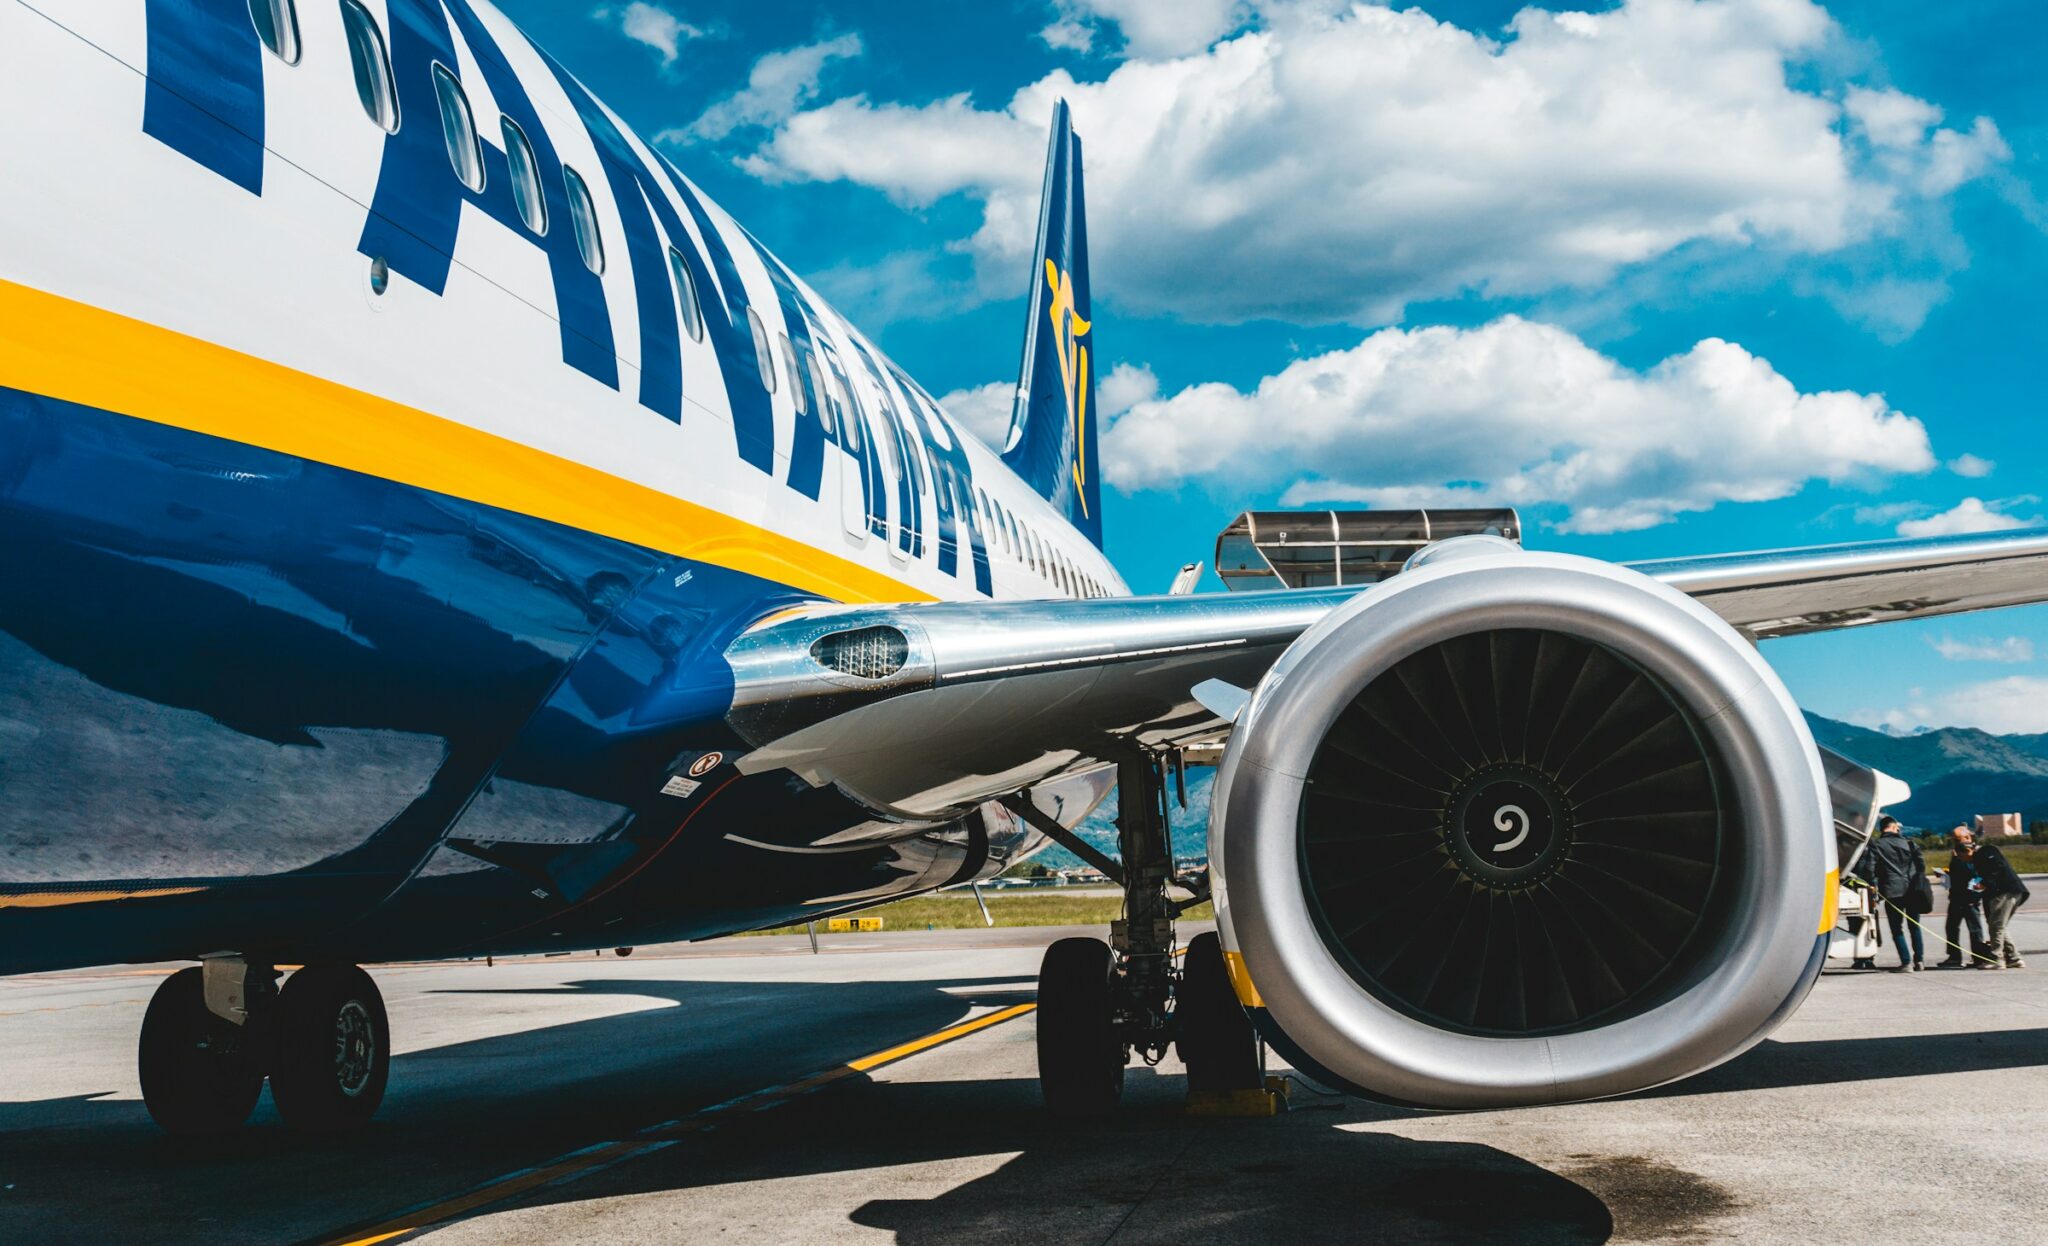 Ryanair Is Crushing It On Social Media: CEO Michael O’Leary Shares the Secret